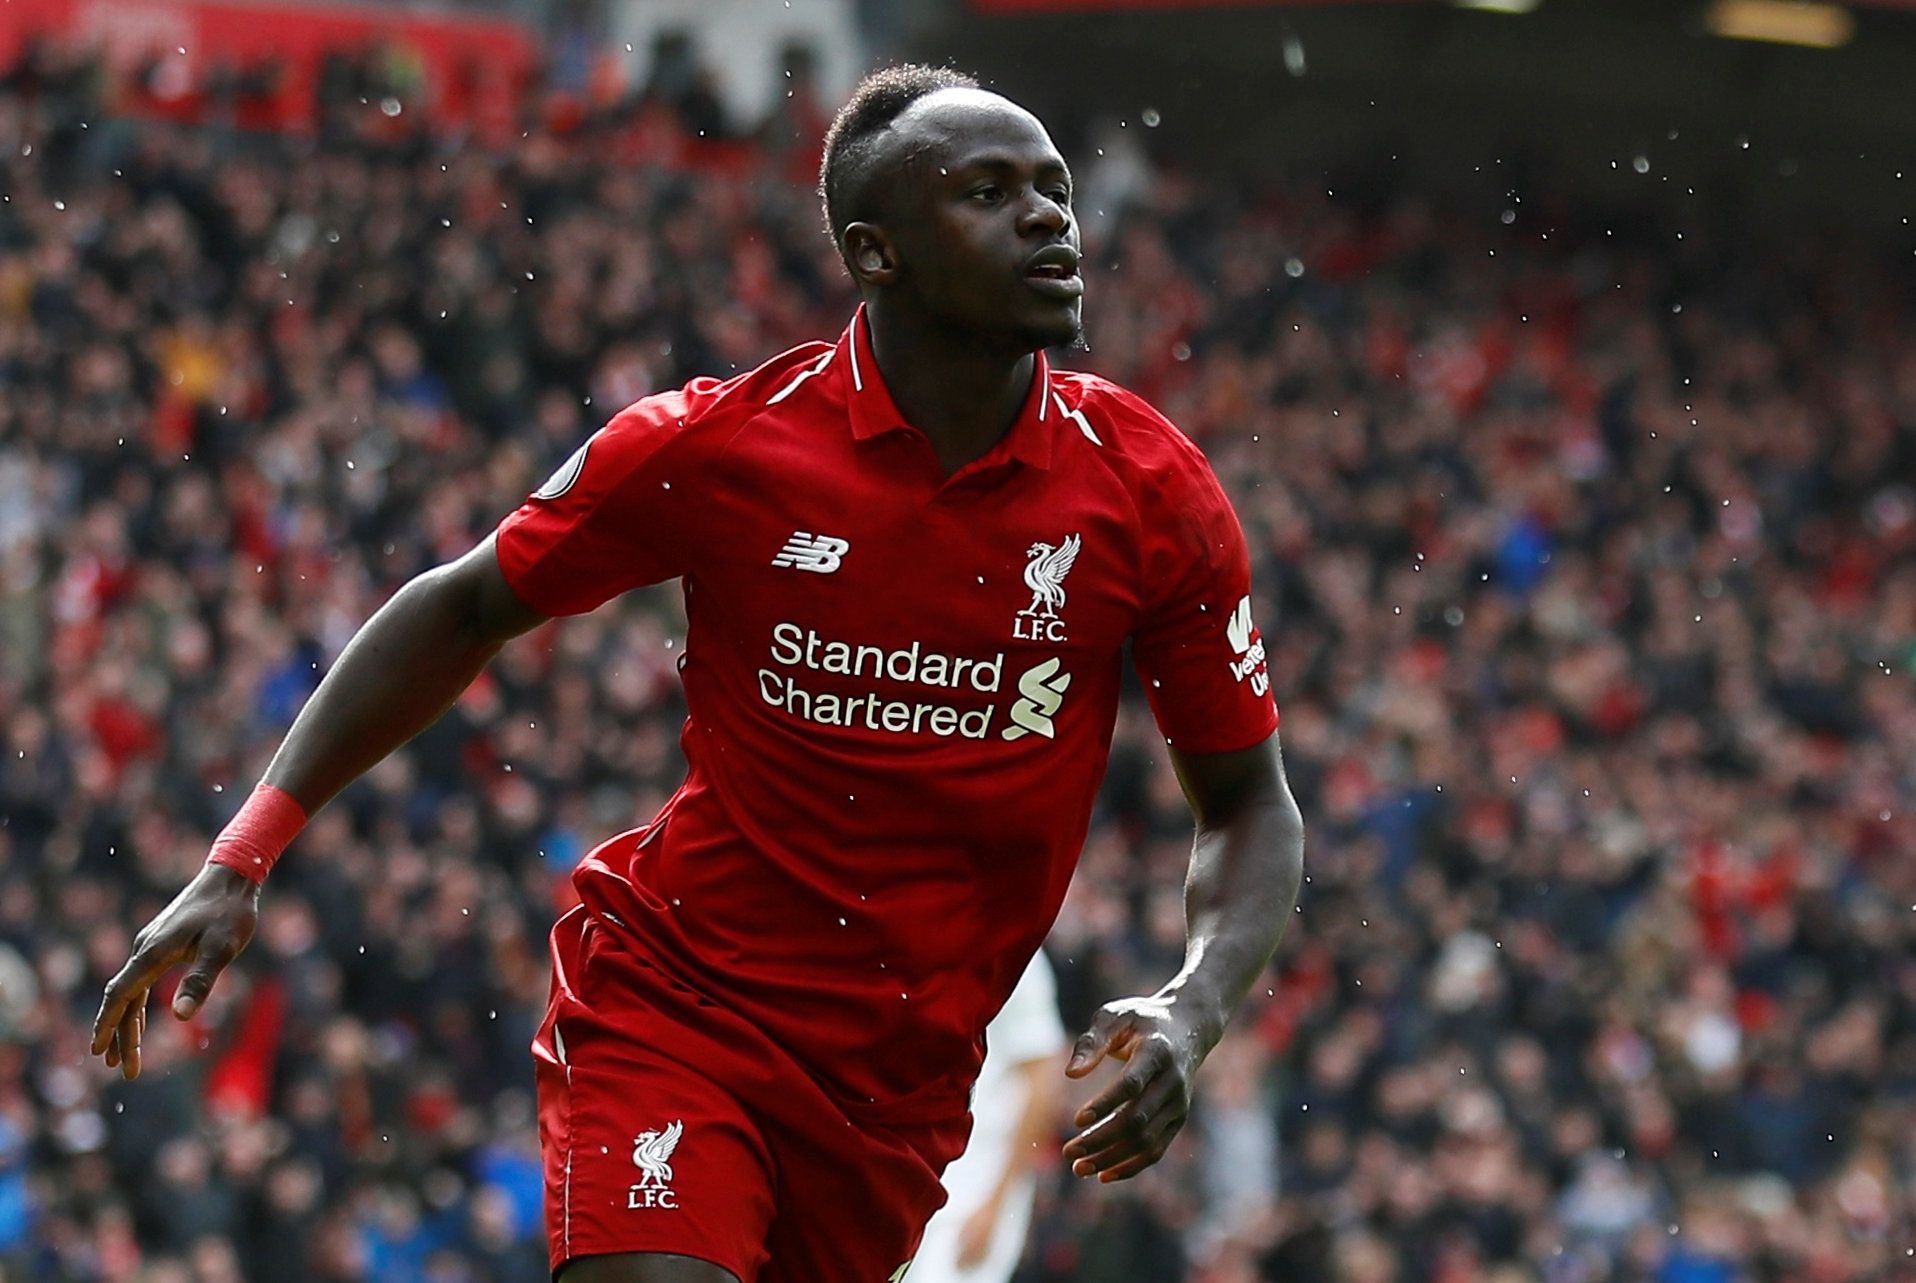 Soccer Football - Premier League - Liverpool v Burnley - Anfield, Liverpool, Britain - March 10, 2019  Liverpool's Sadio Mane celebrates scoring their second goal     Action Images via Reuters/Jason Cairnduff  EDITORIAL USE ONLY. No use with unauthorized audio, video, data, fixture lists, club/league logos or 